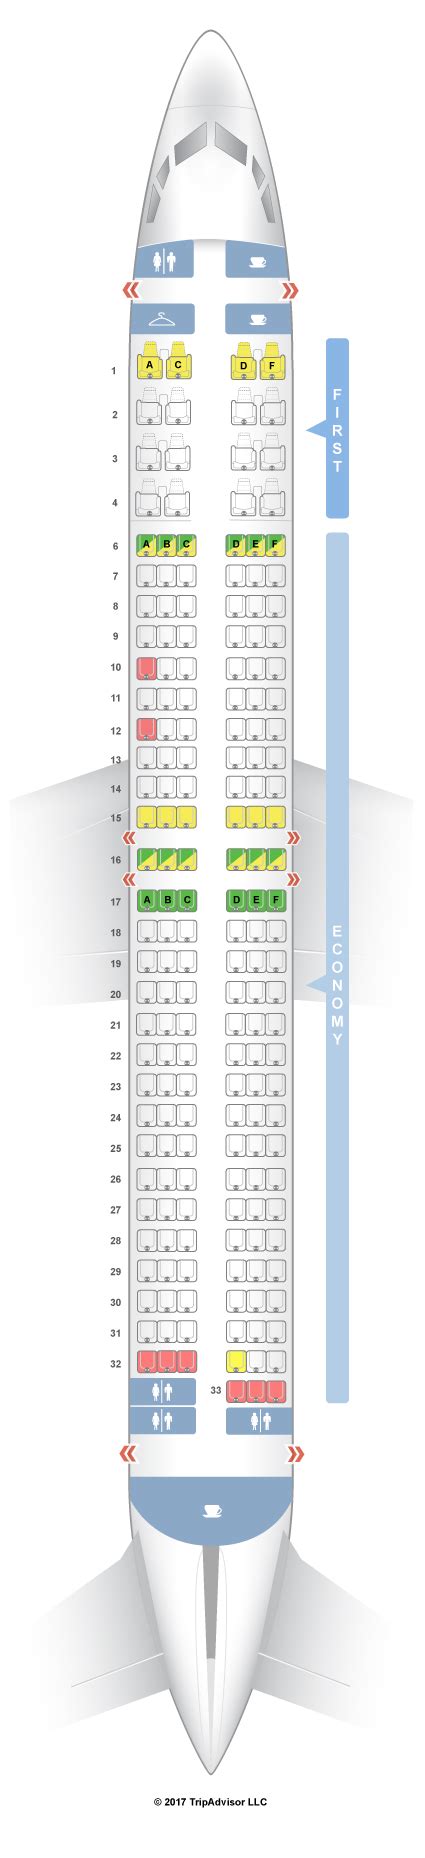 The Boeing 737-900 ER V.2 is an aircraft produced by Boeing for Alaska Airlines and has the following seat configuration: 16-0-24-138. Seat map Tap on a seat for details. 